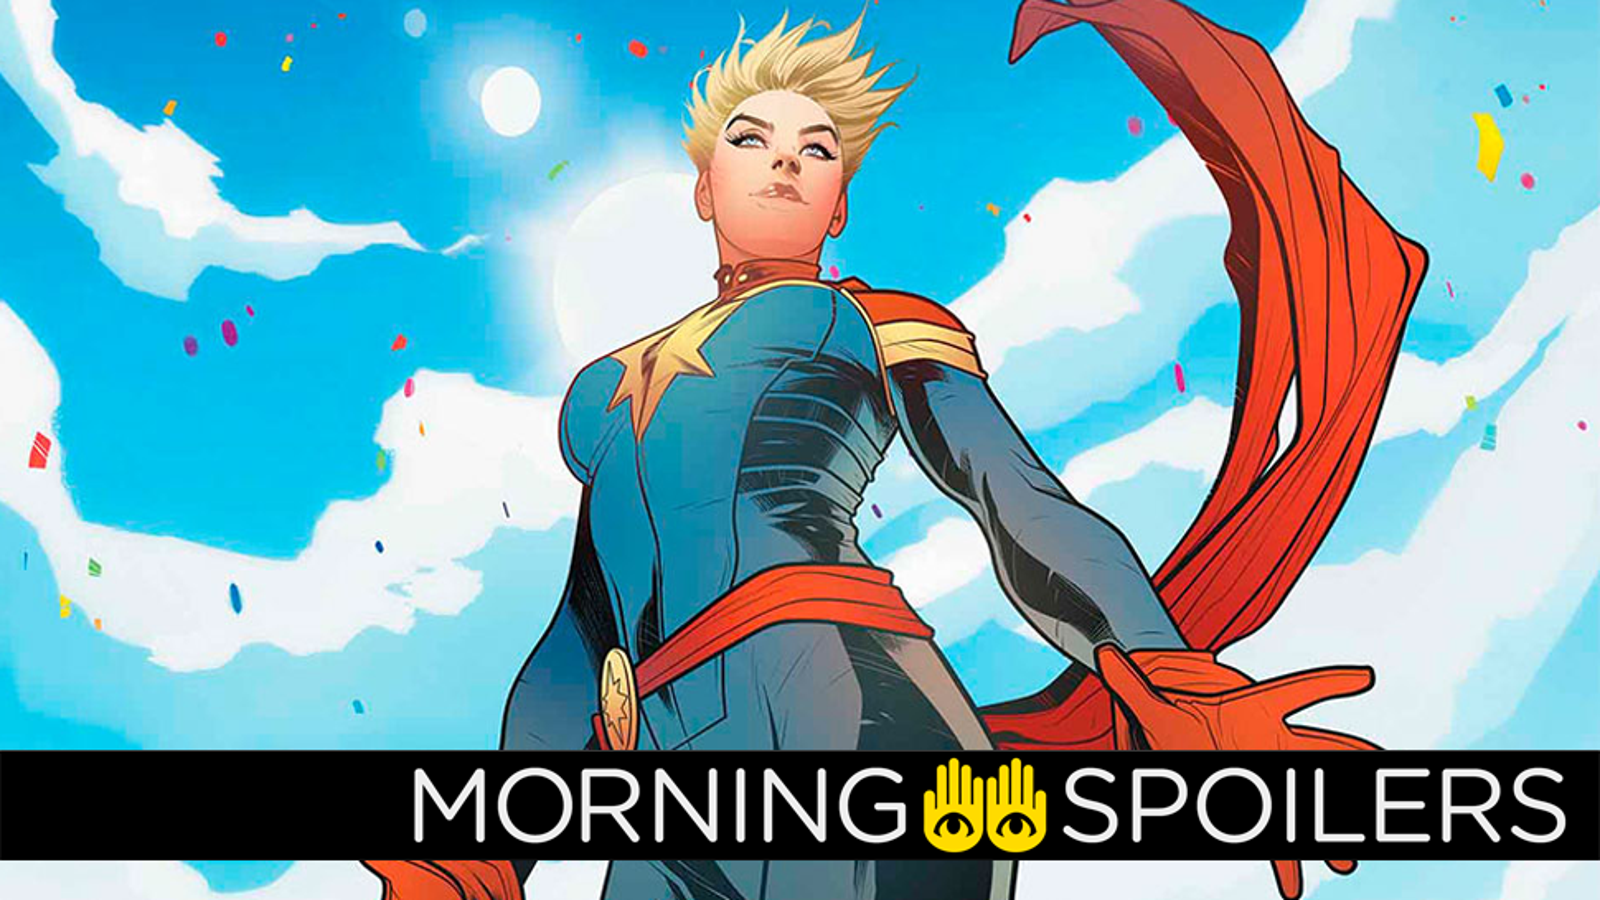 Weird New Rumors About Carol Danvers' Origins in the Captain Marvel Movie1600 x 900